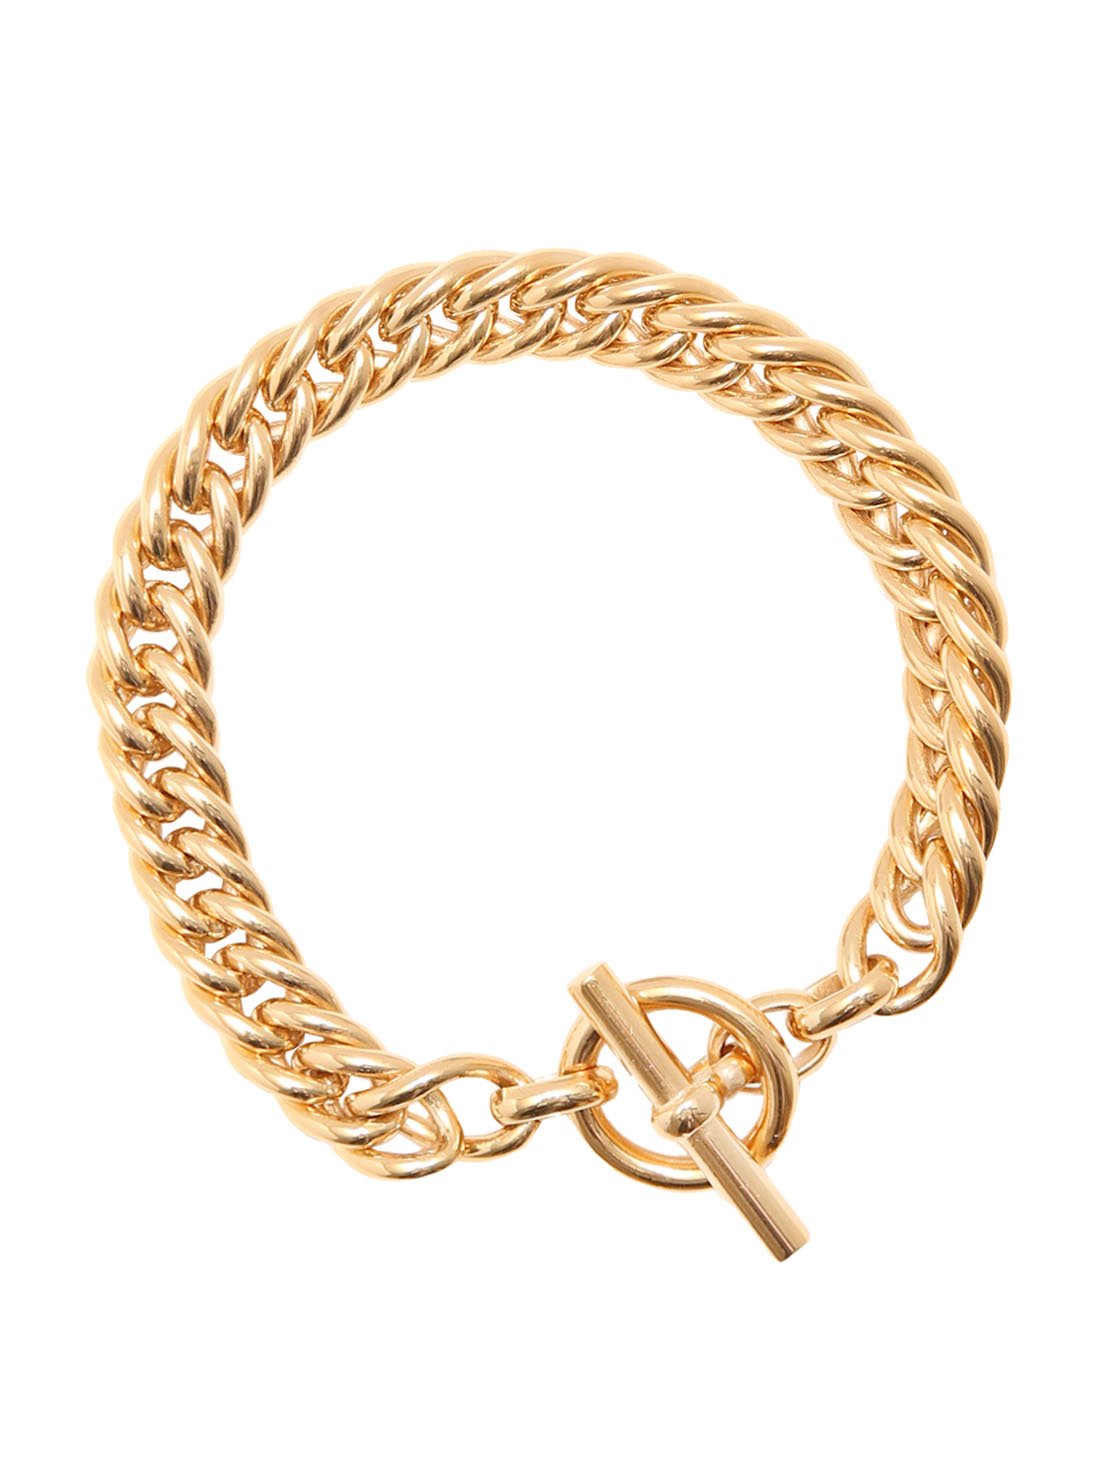 Small Gold Curb Link Bracelet